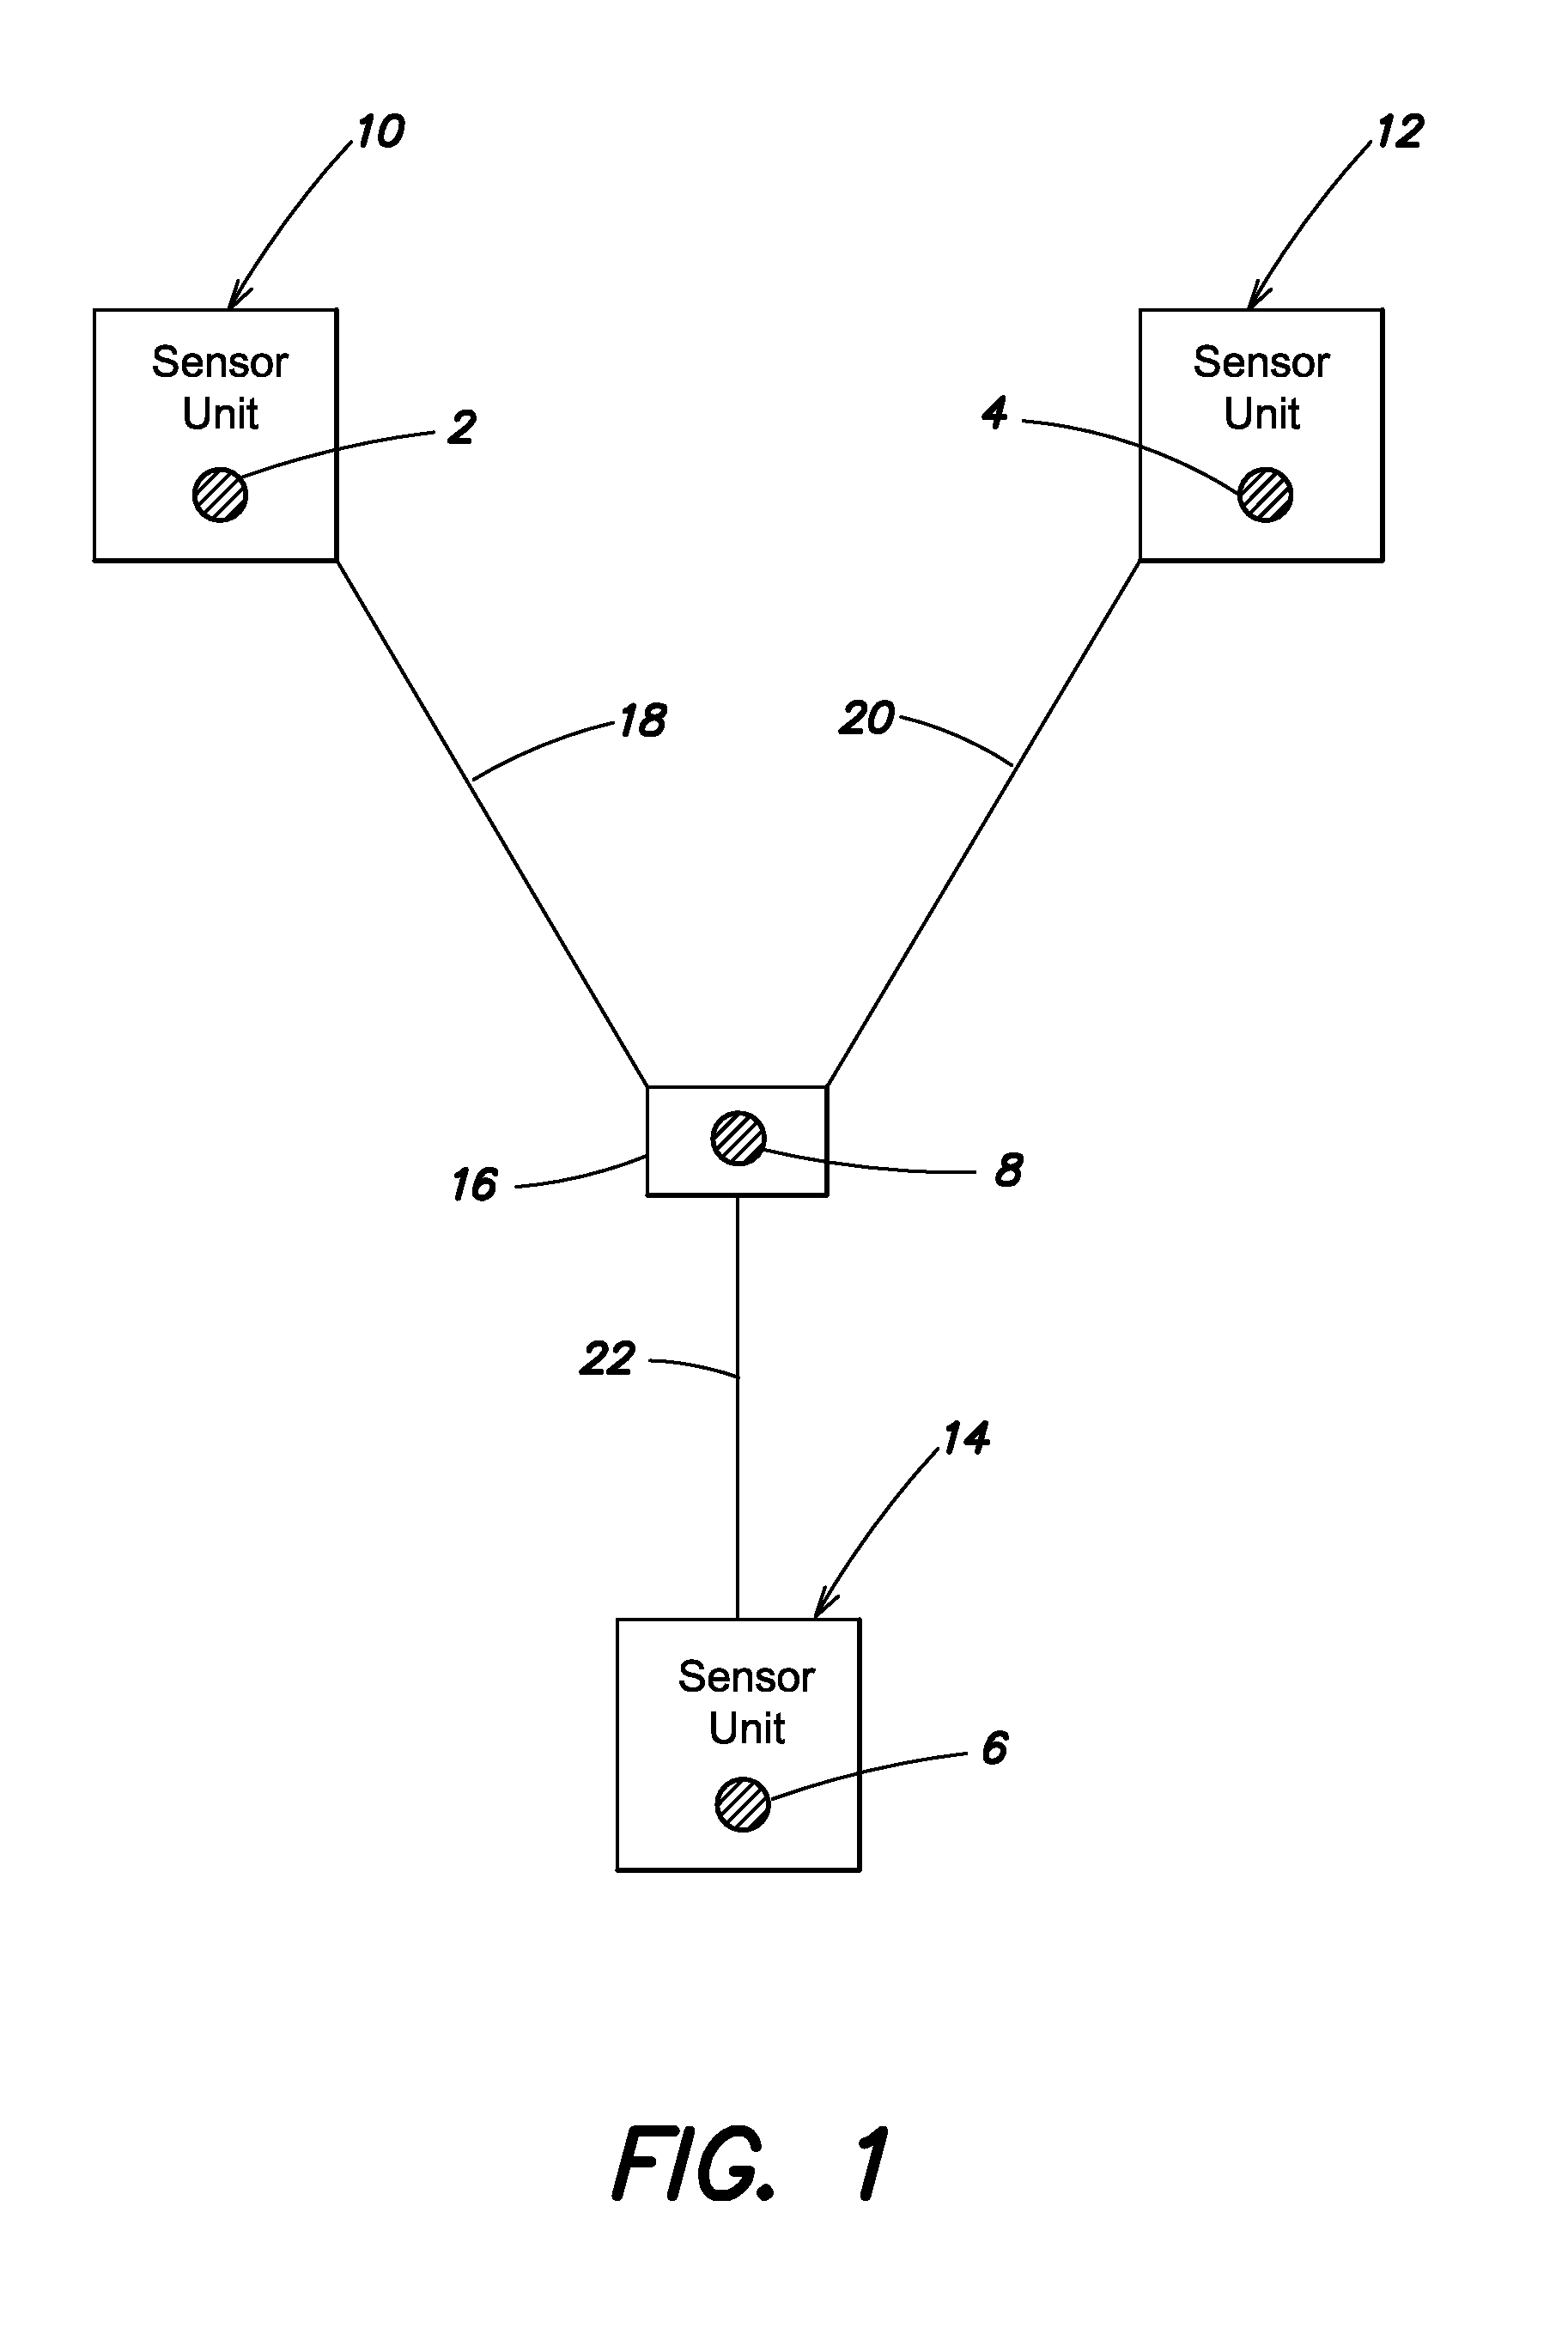 Power line voltage measurement using a distributed resistance conductor